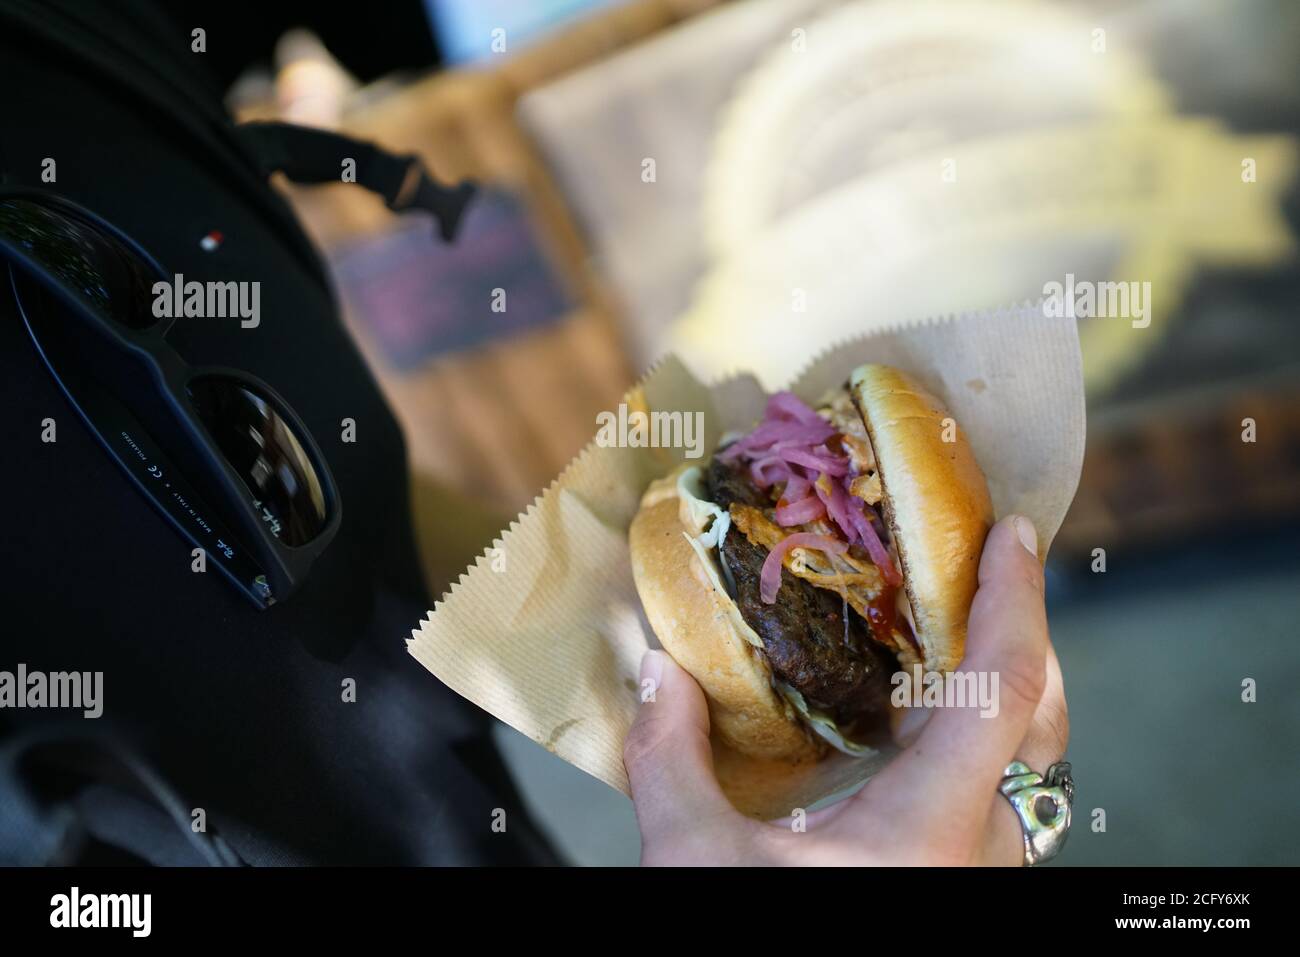 Burger in hand with red and white onions at a foodfestival Stock Photo